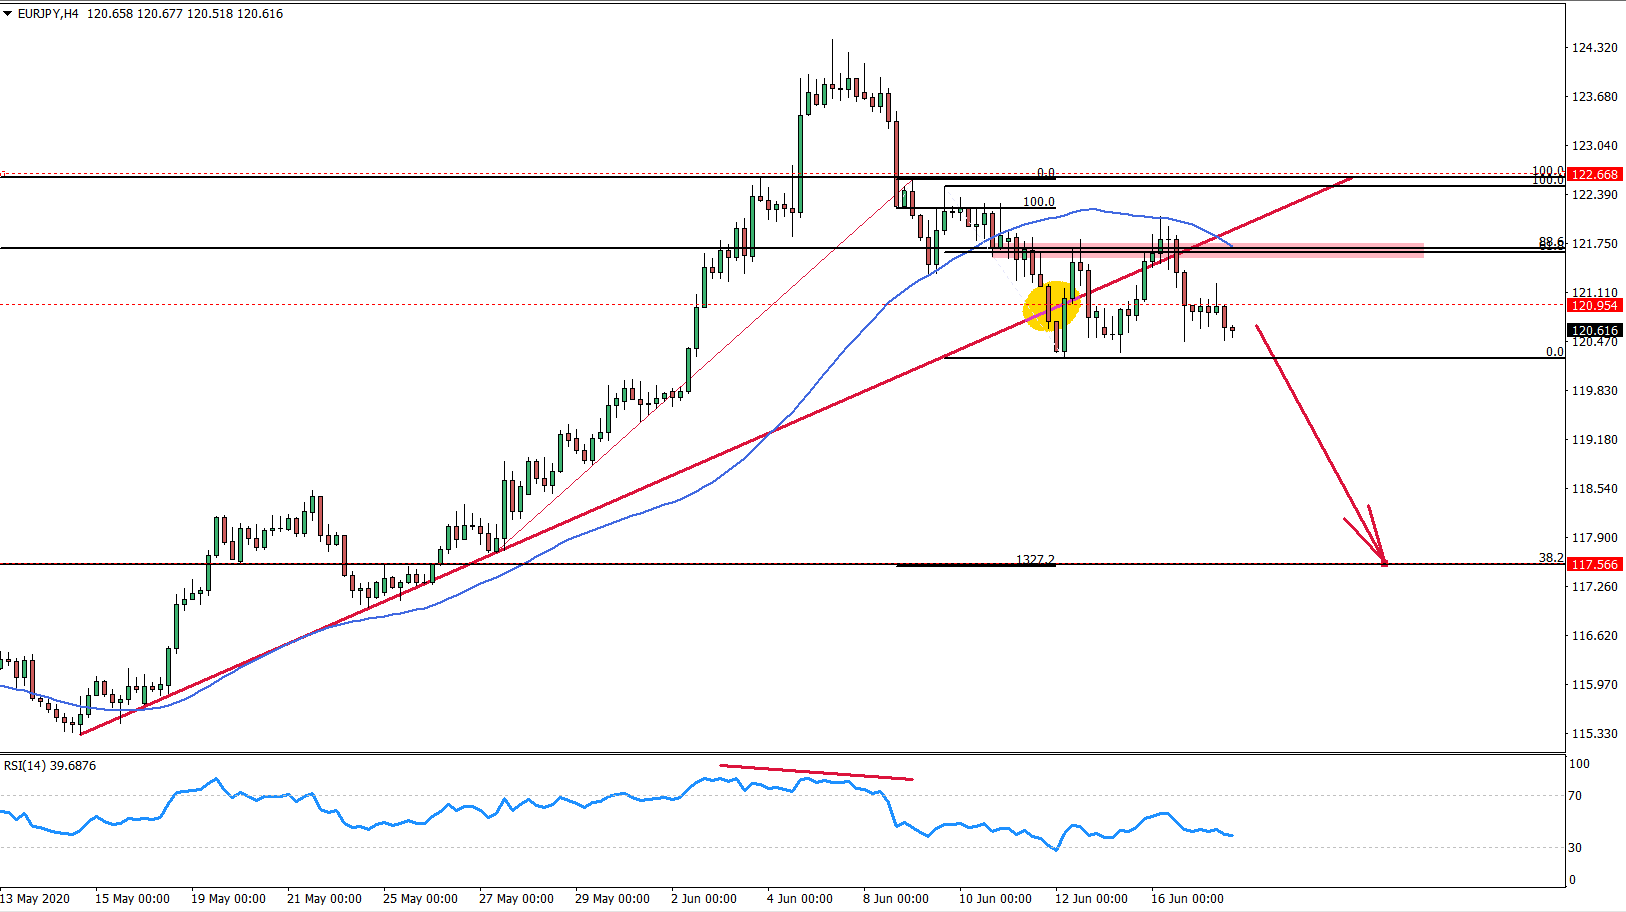 EURJPY 4hour chart June 17th 2020